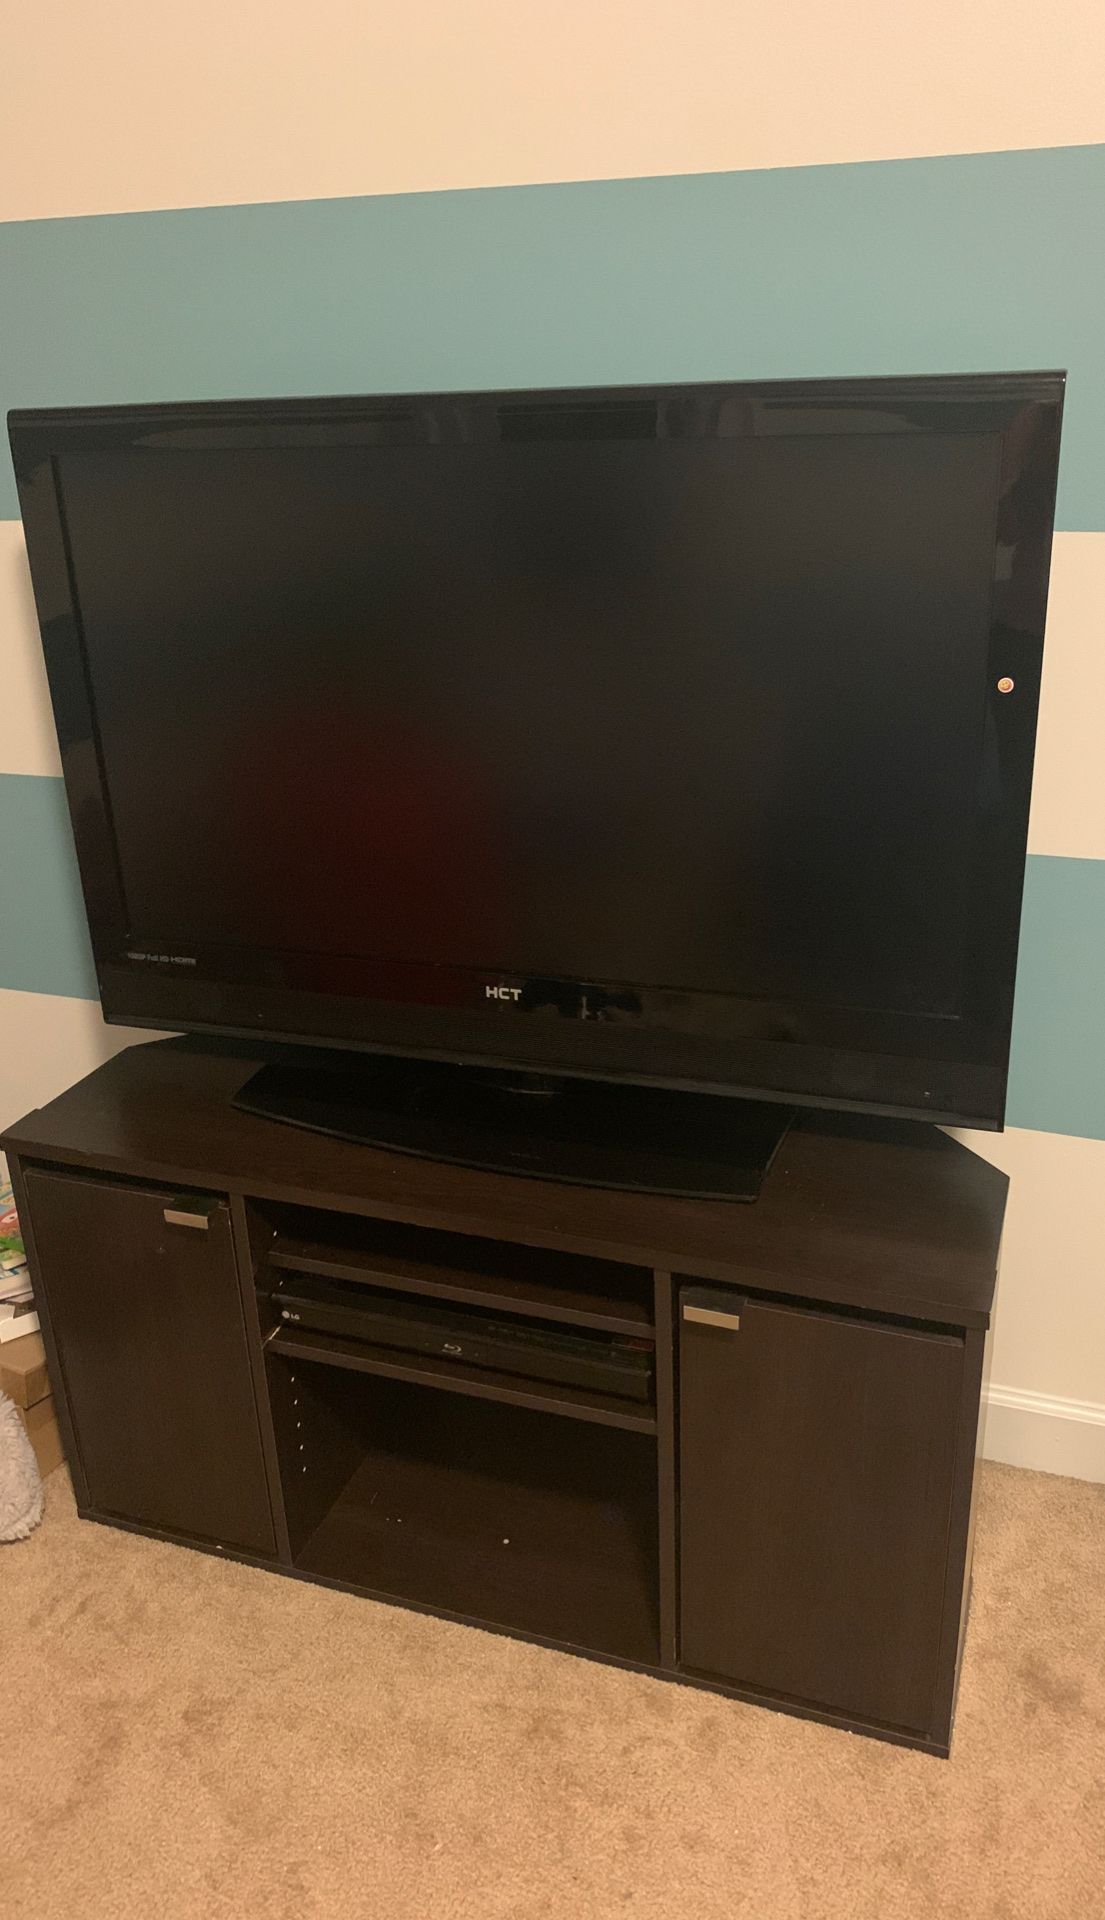 42” TV and table